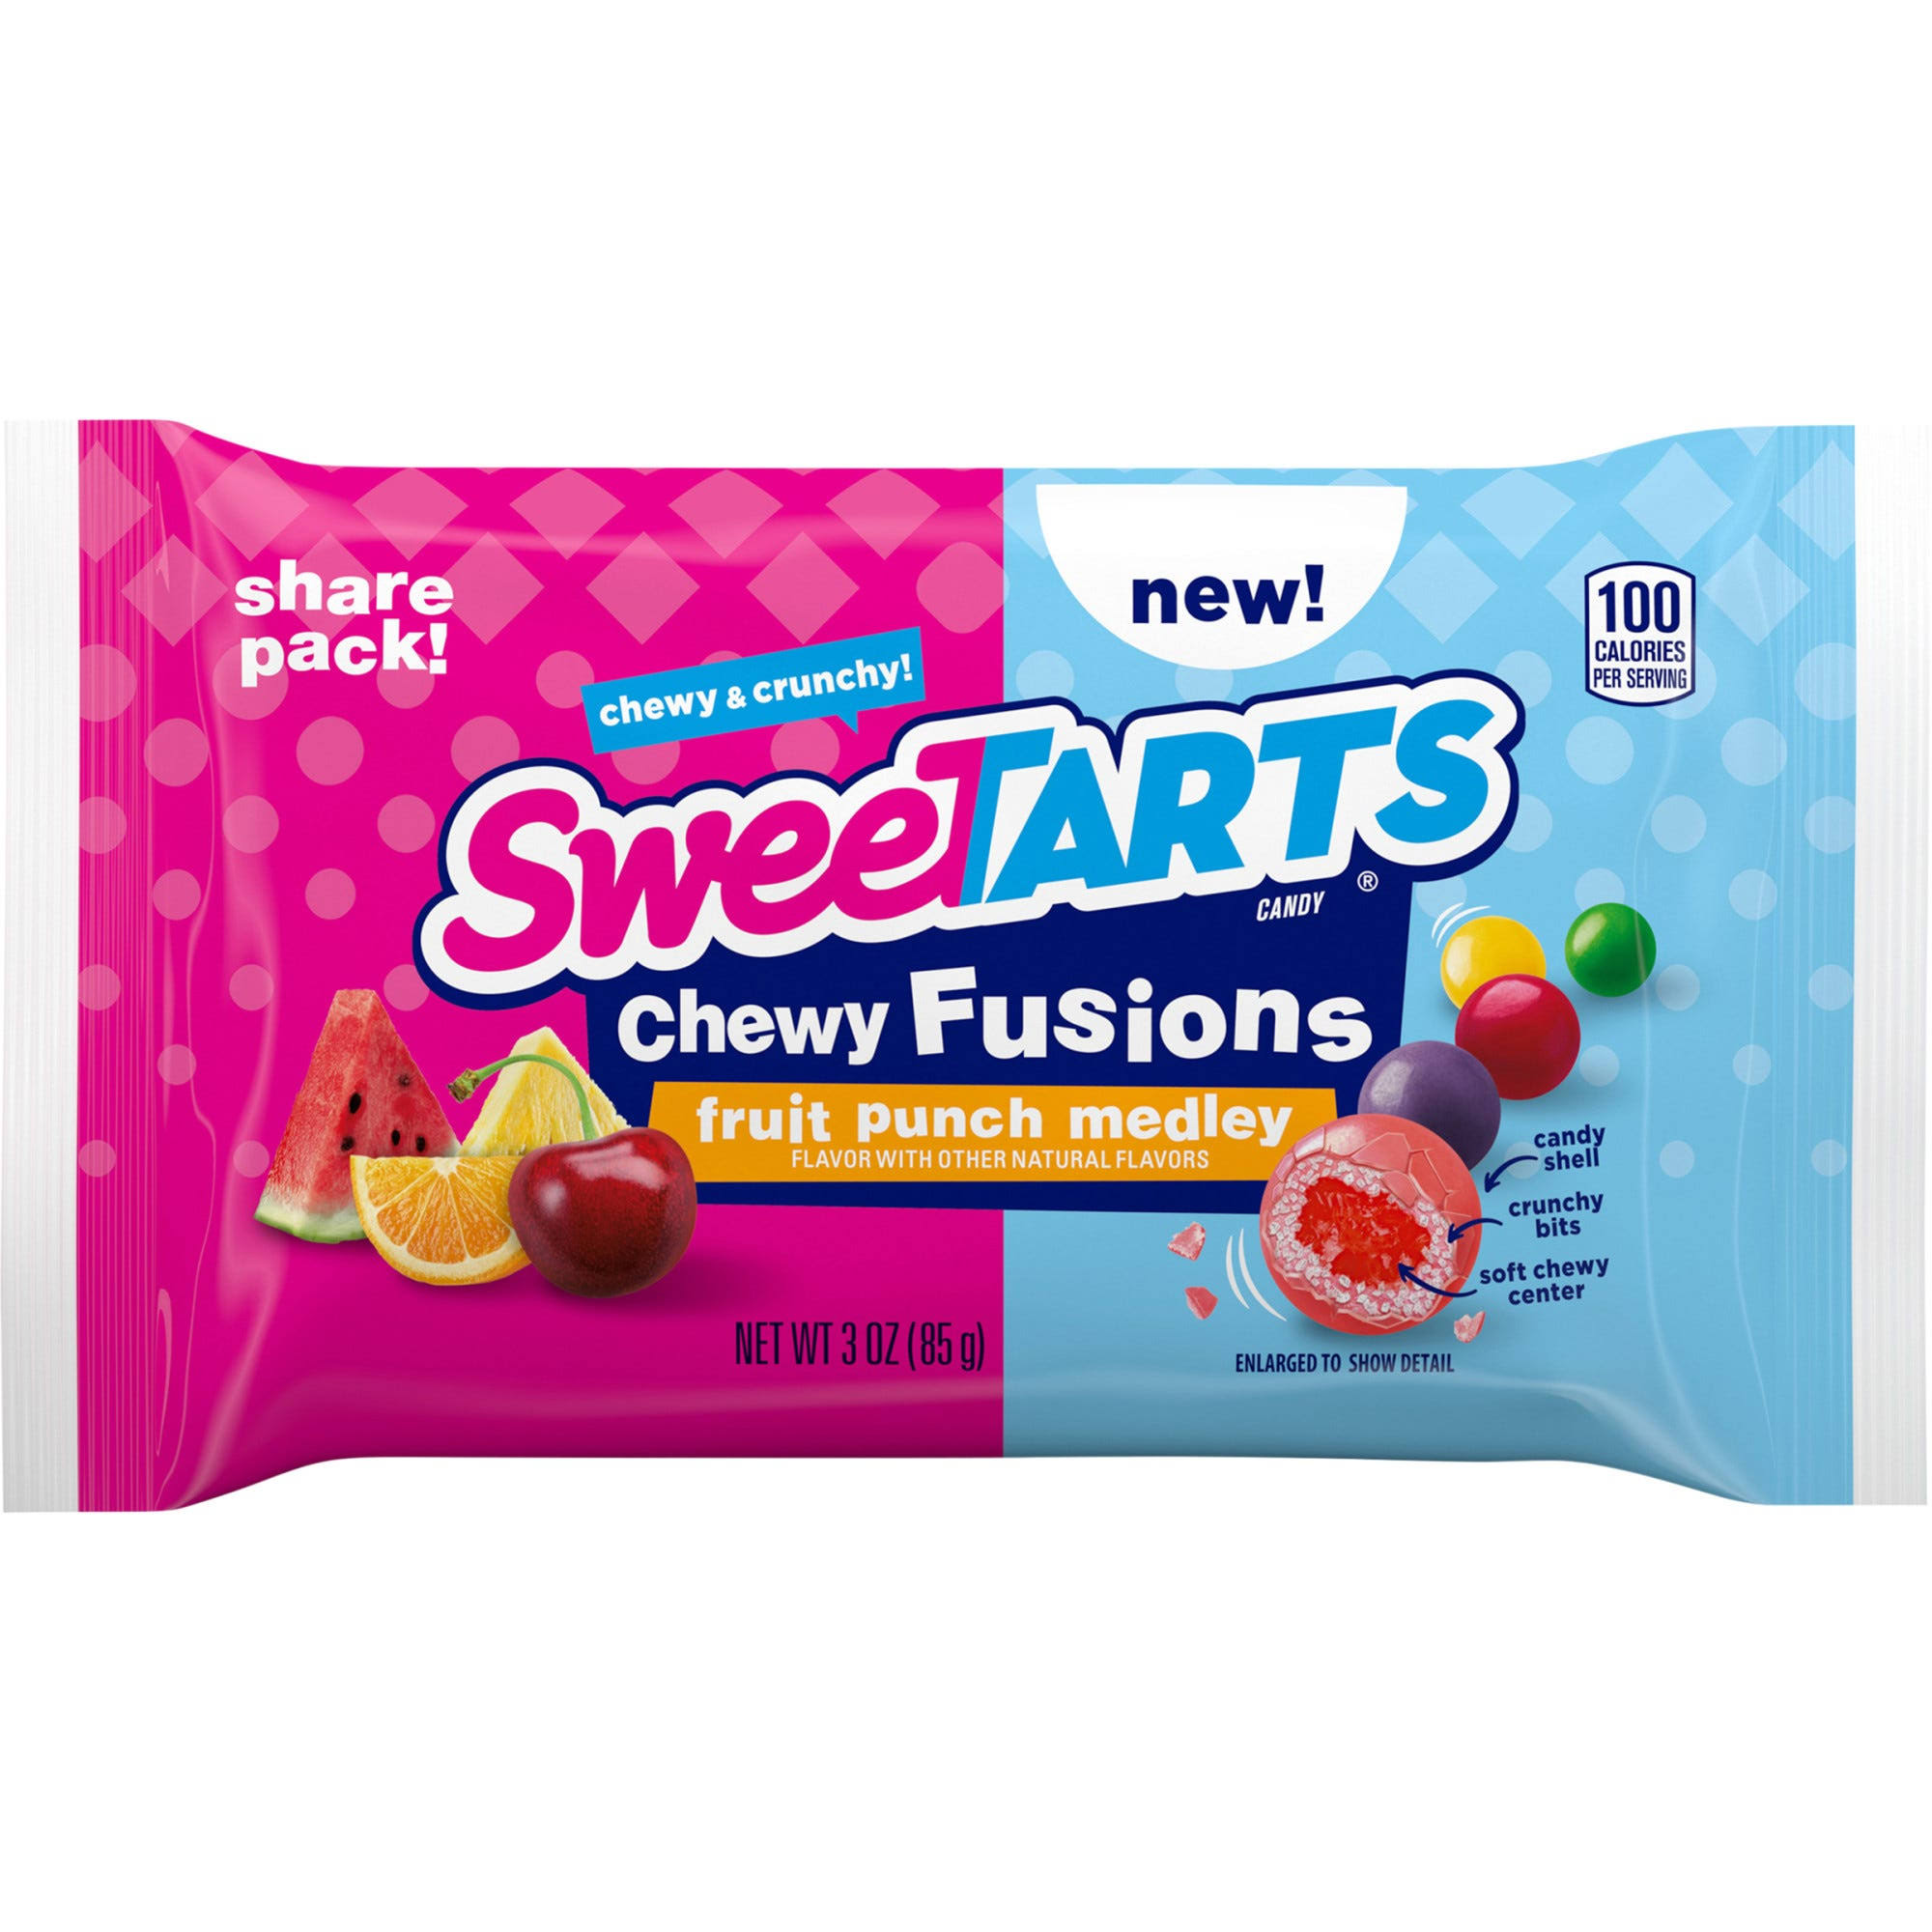 Sweetarts Chewy Fusions Candy, Fruit Punch Medley, Share Pack - 3 oz